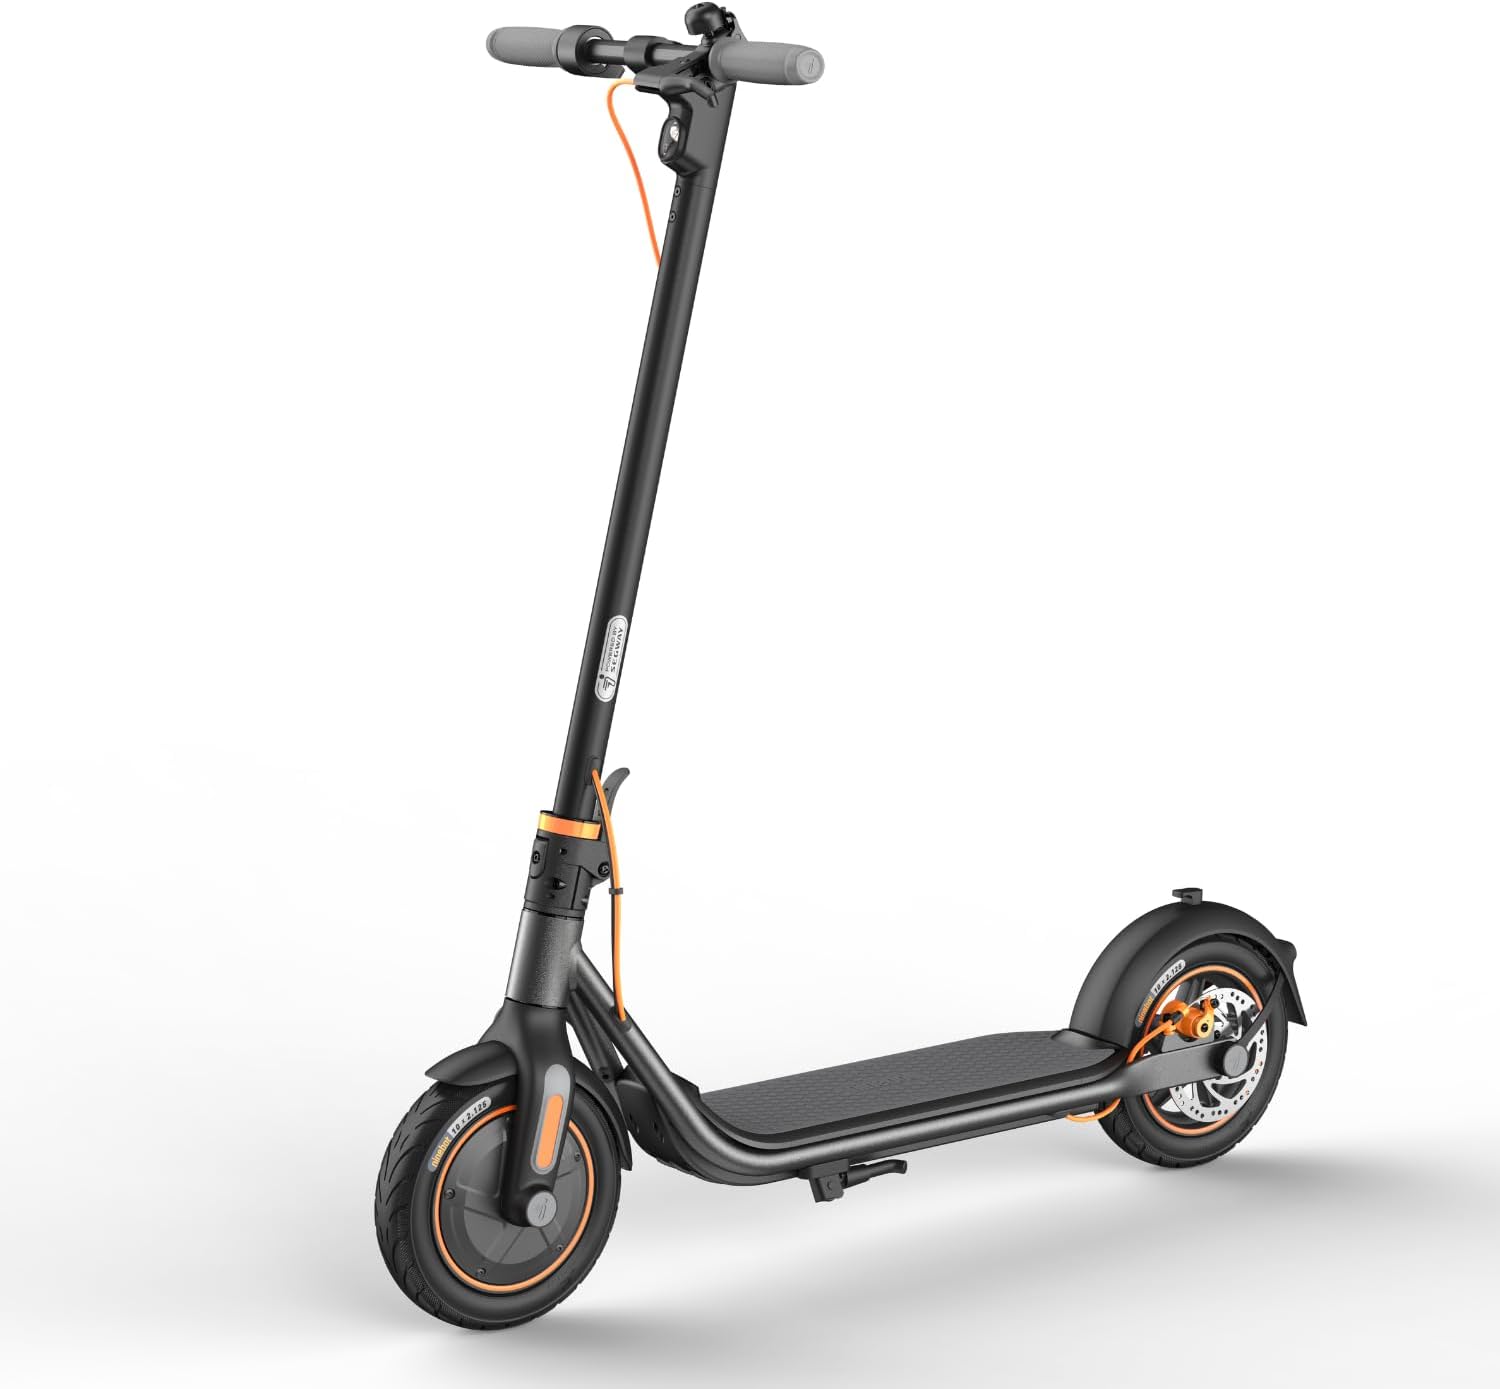 Segway Ninebot F35 Electric Kick Scooter, 350W Motor, 18.6 mph Top Speed, Commuter Scooter for Adults - image 1 of 5